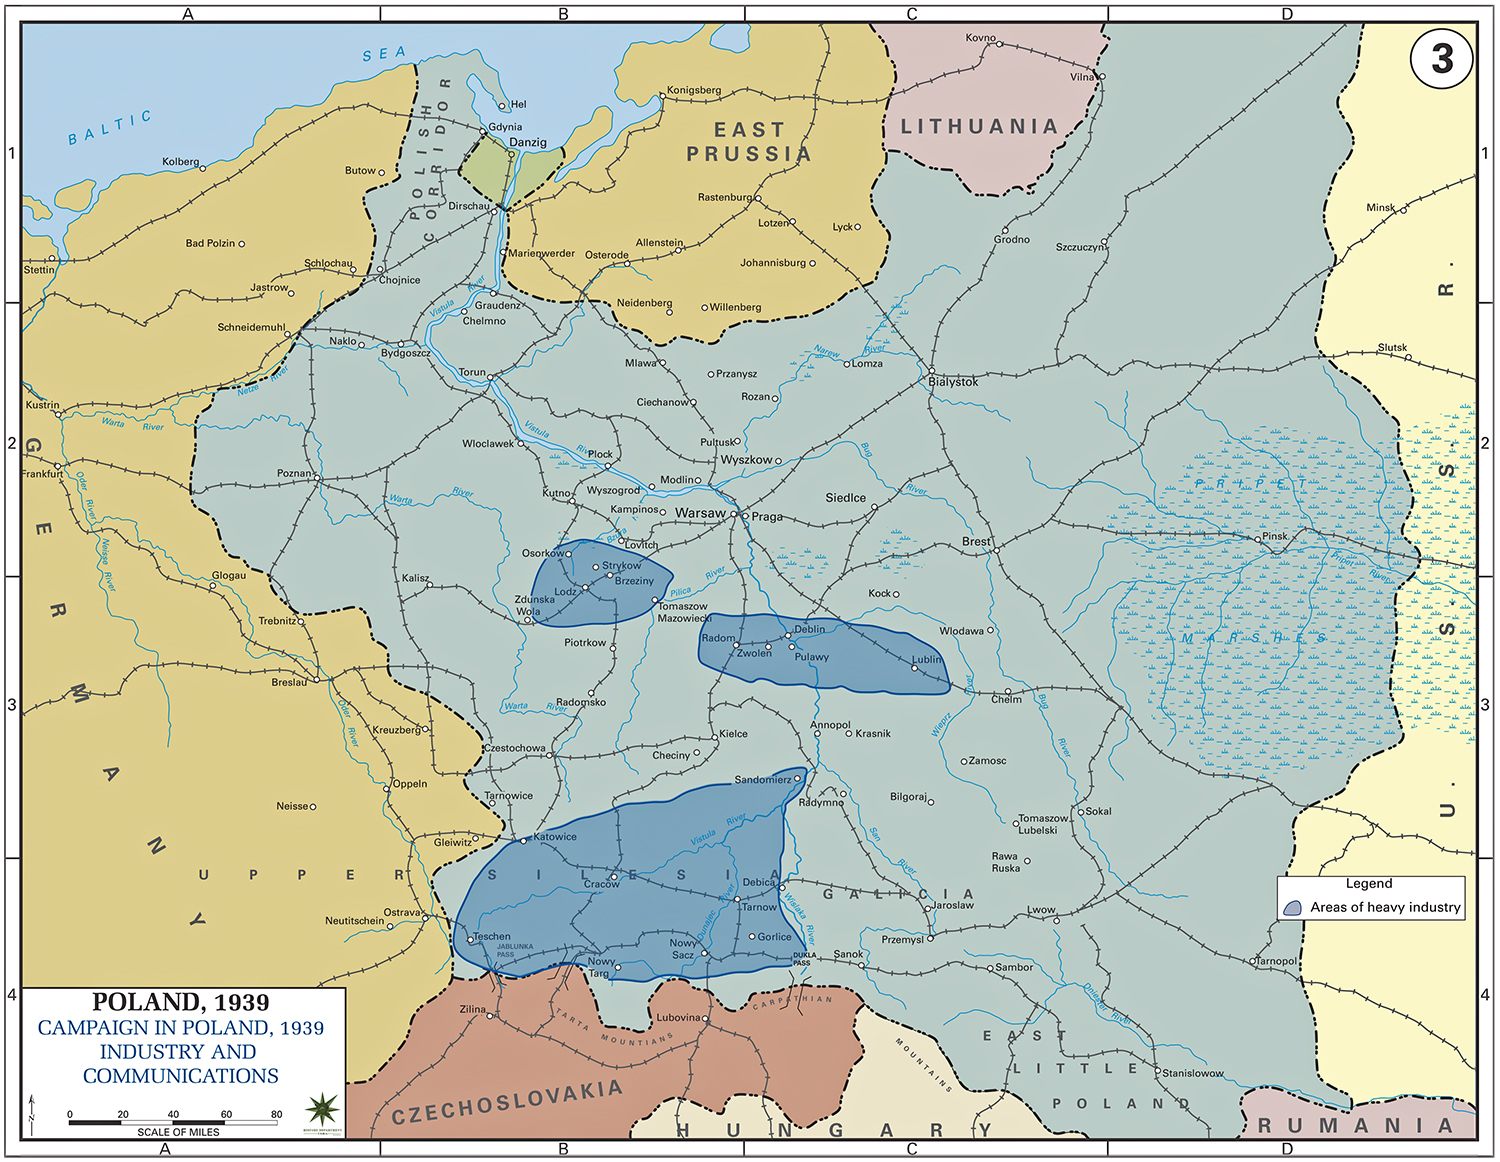 History Map of WWII: Campaign in Poland, Industry and Communications, 1939